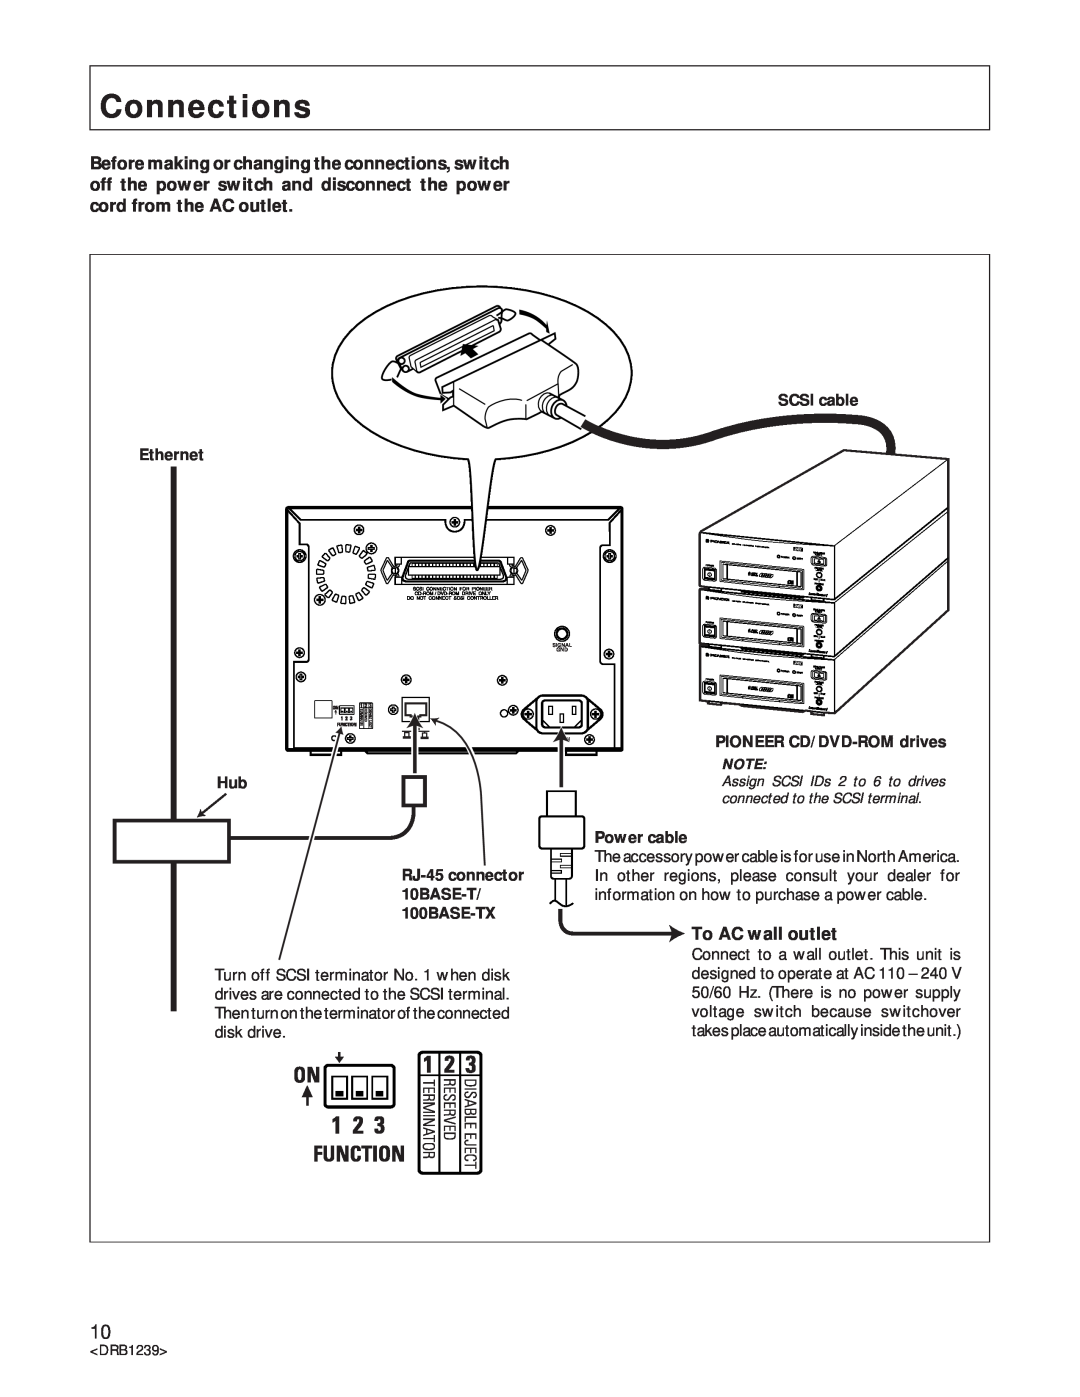 Pioneer DRM-6NX manual Connections, To AC wall outlet, Ethernet Hub, SCSI cable PIONEER CD/DVD-ROM drives, Power cable 